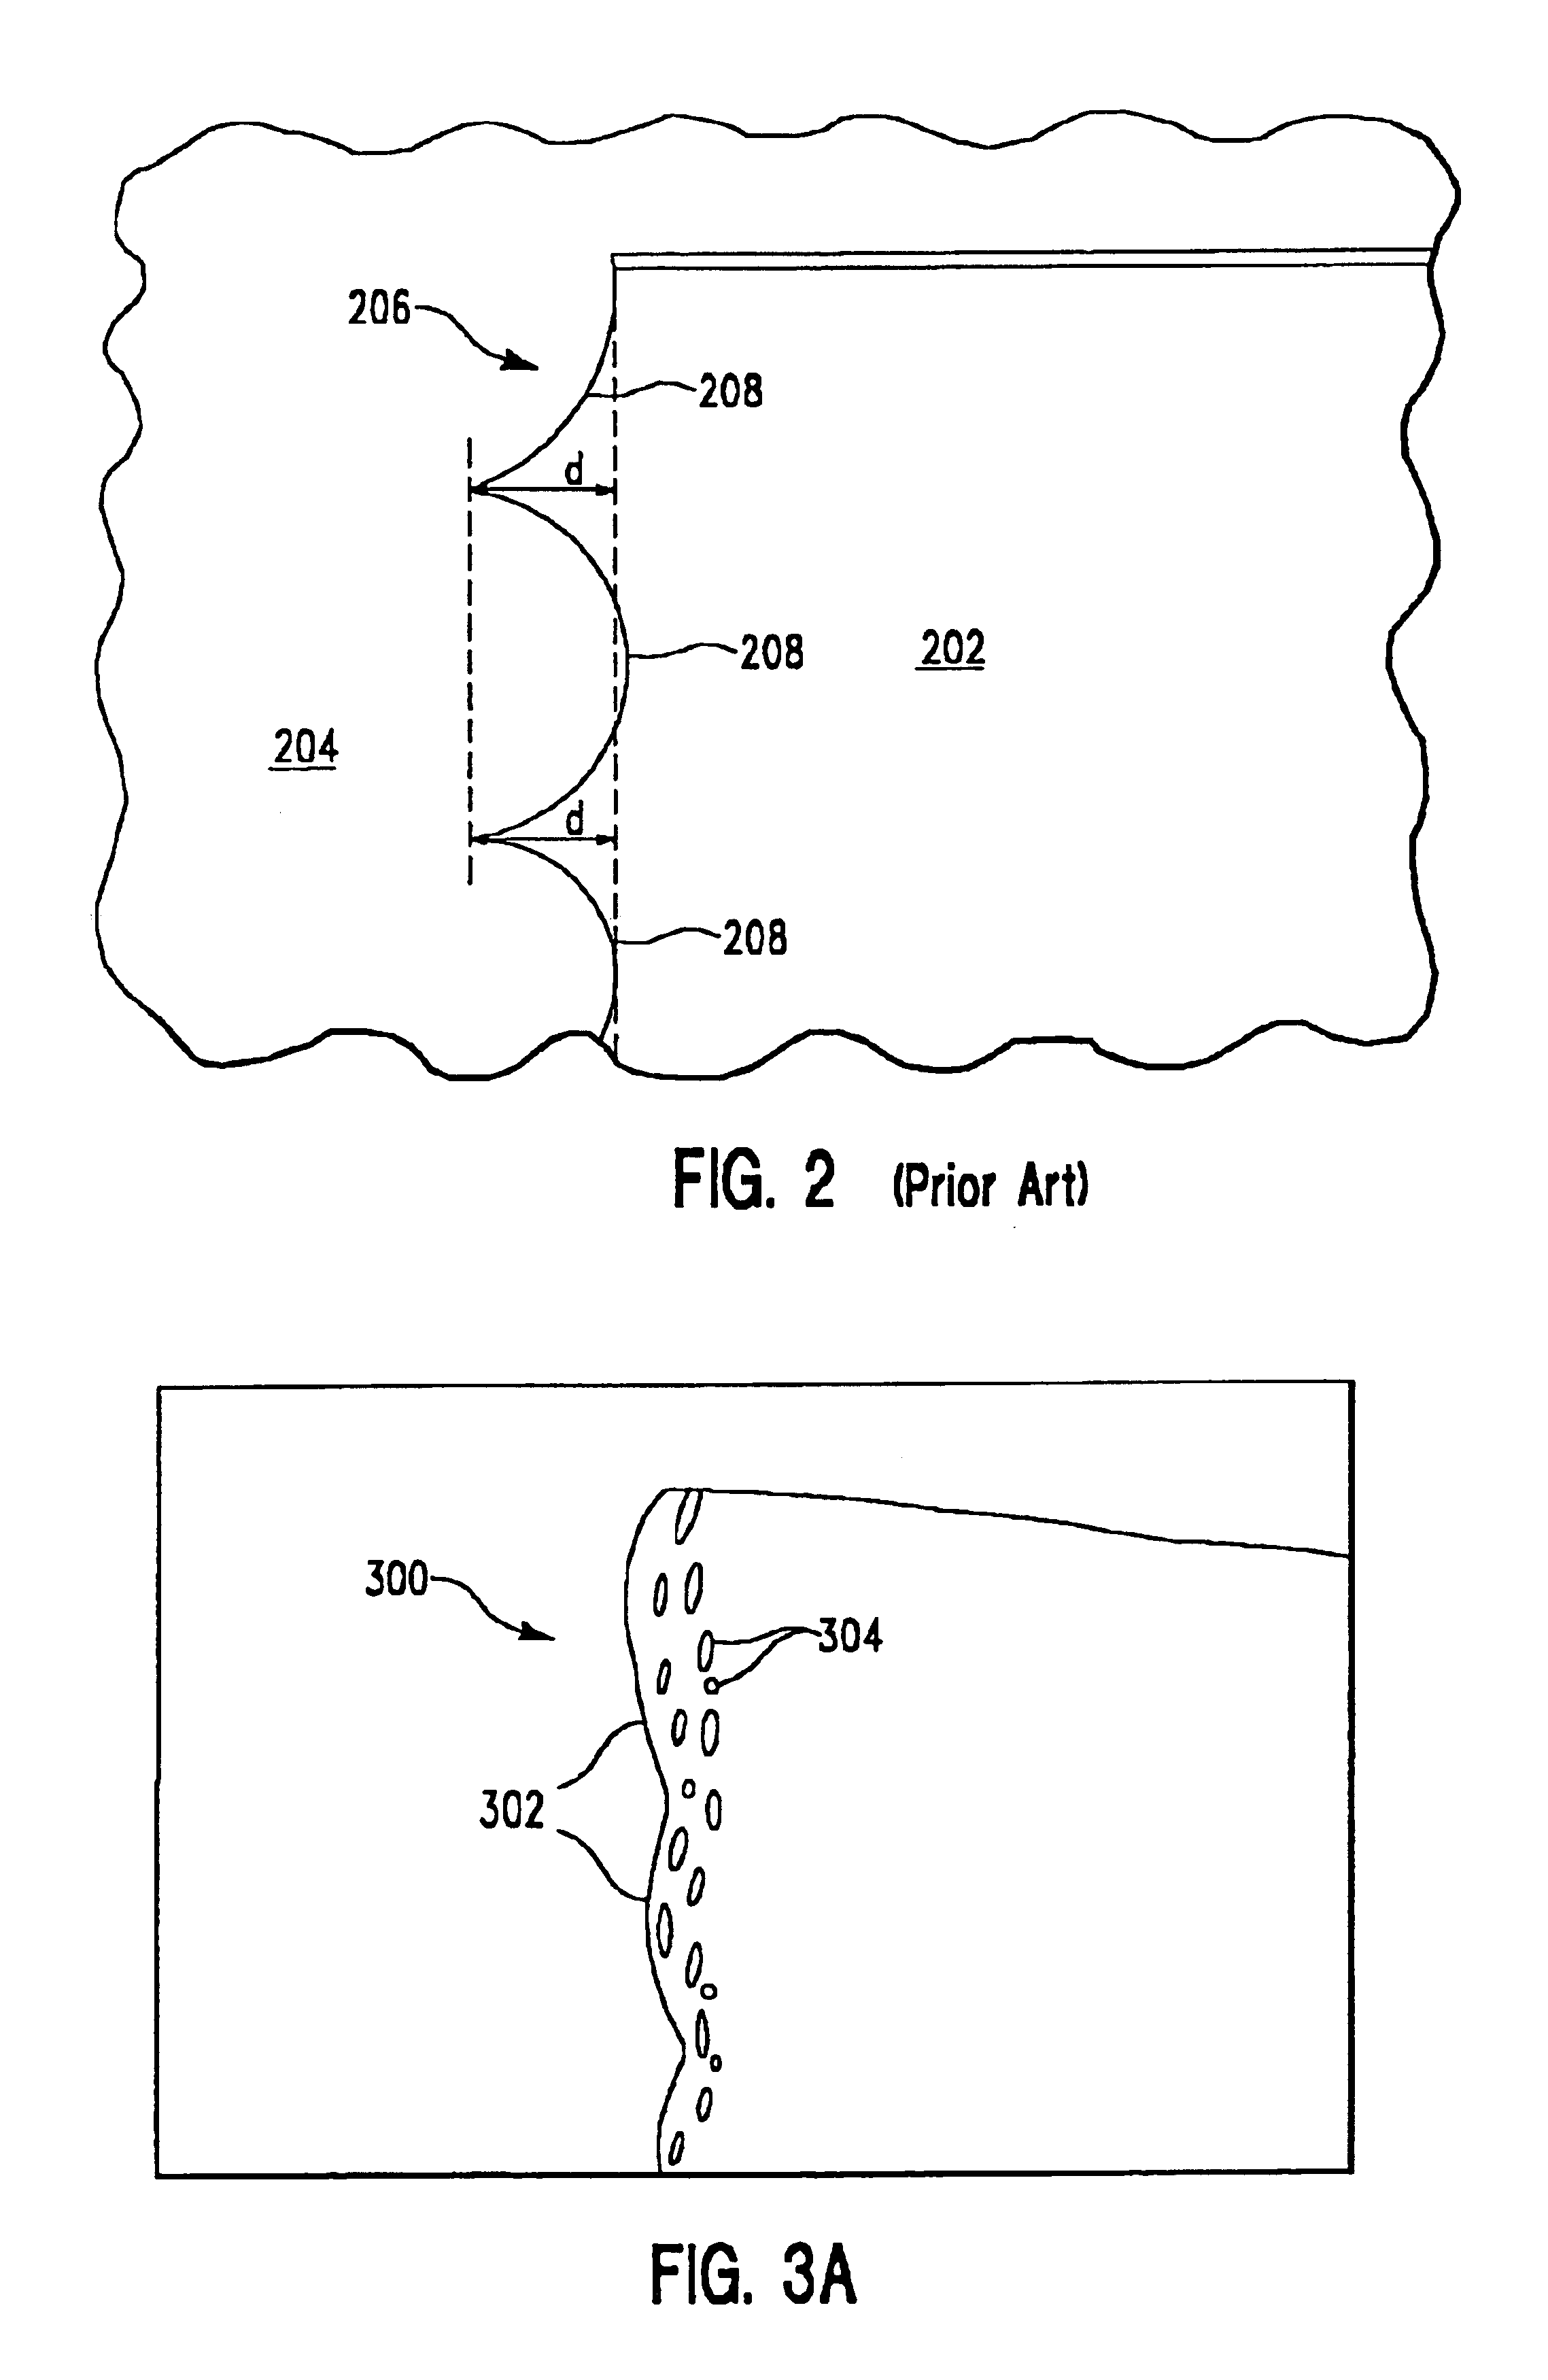 Method of smoothing a trench sidewall after a deep trench silicon etch process